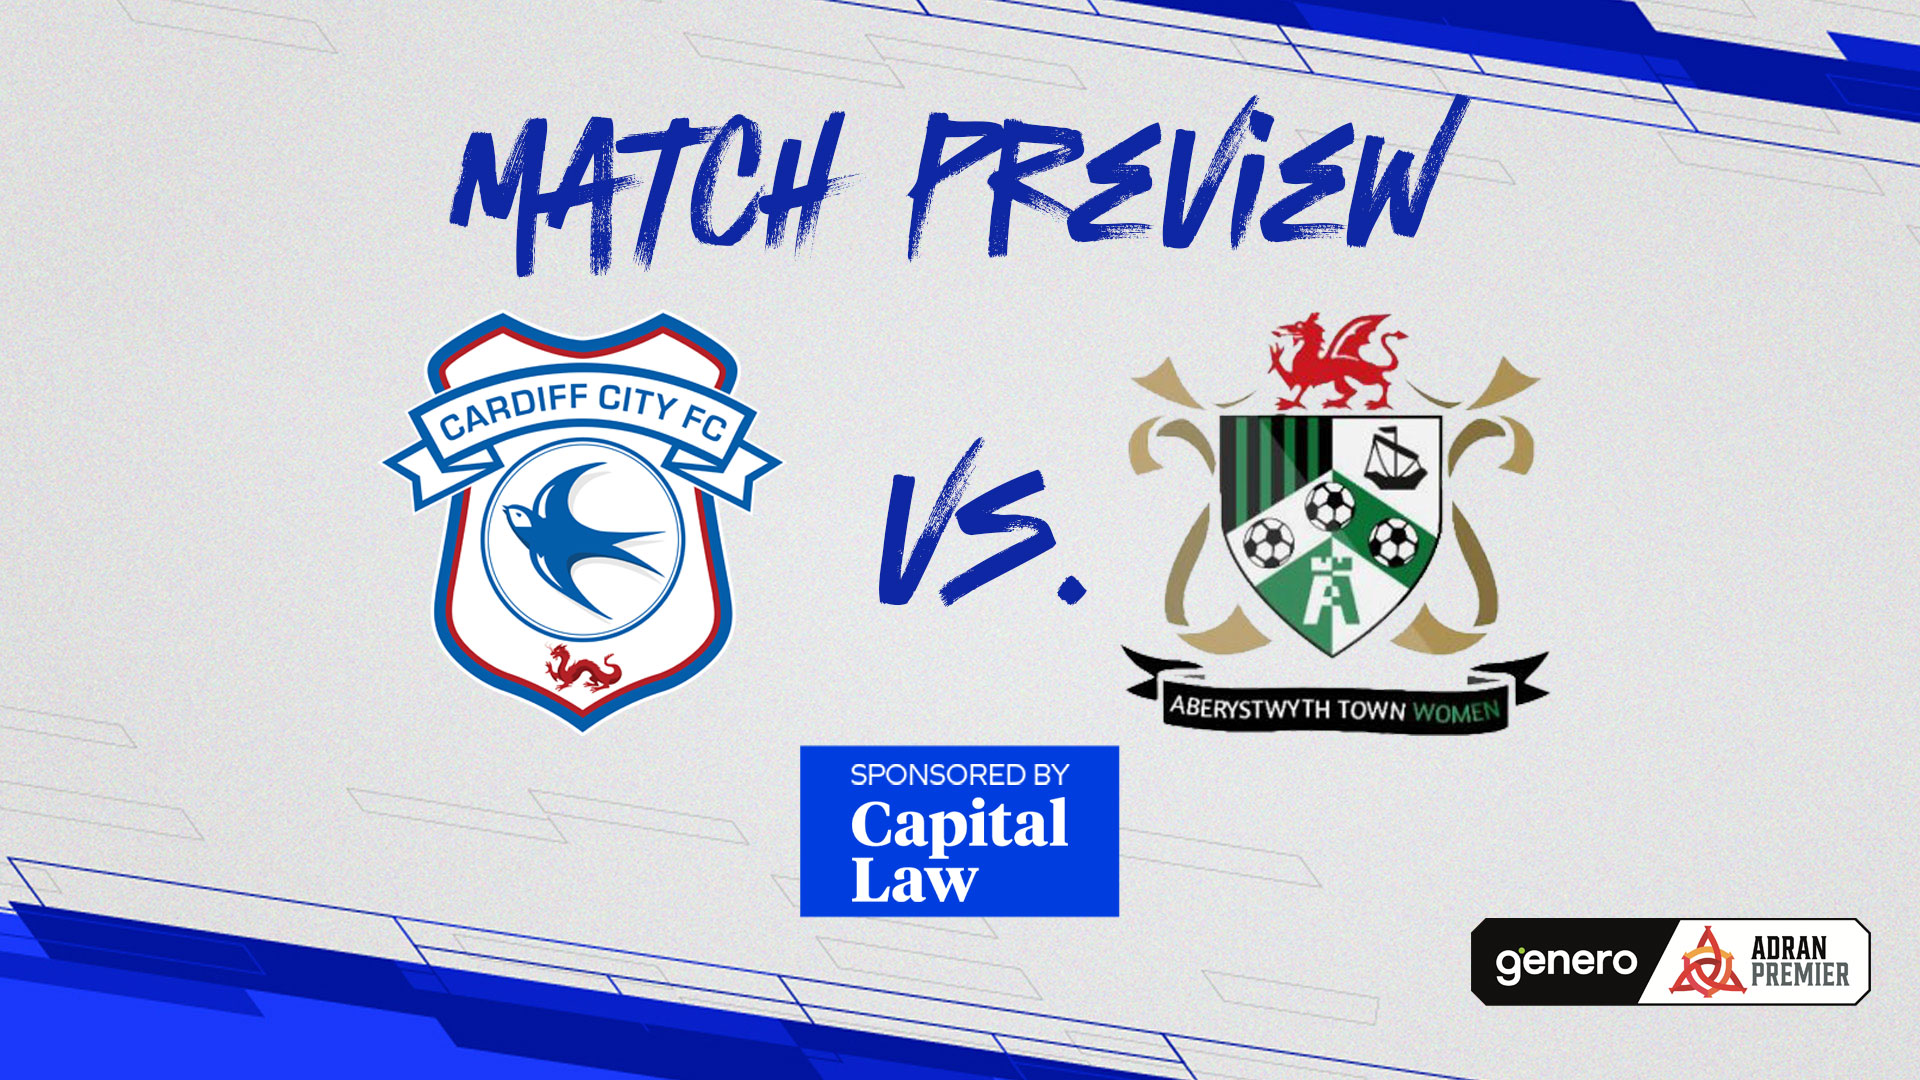 Match Preview: Cardiff City vs. Aberystwyth Town